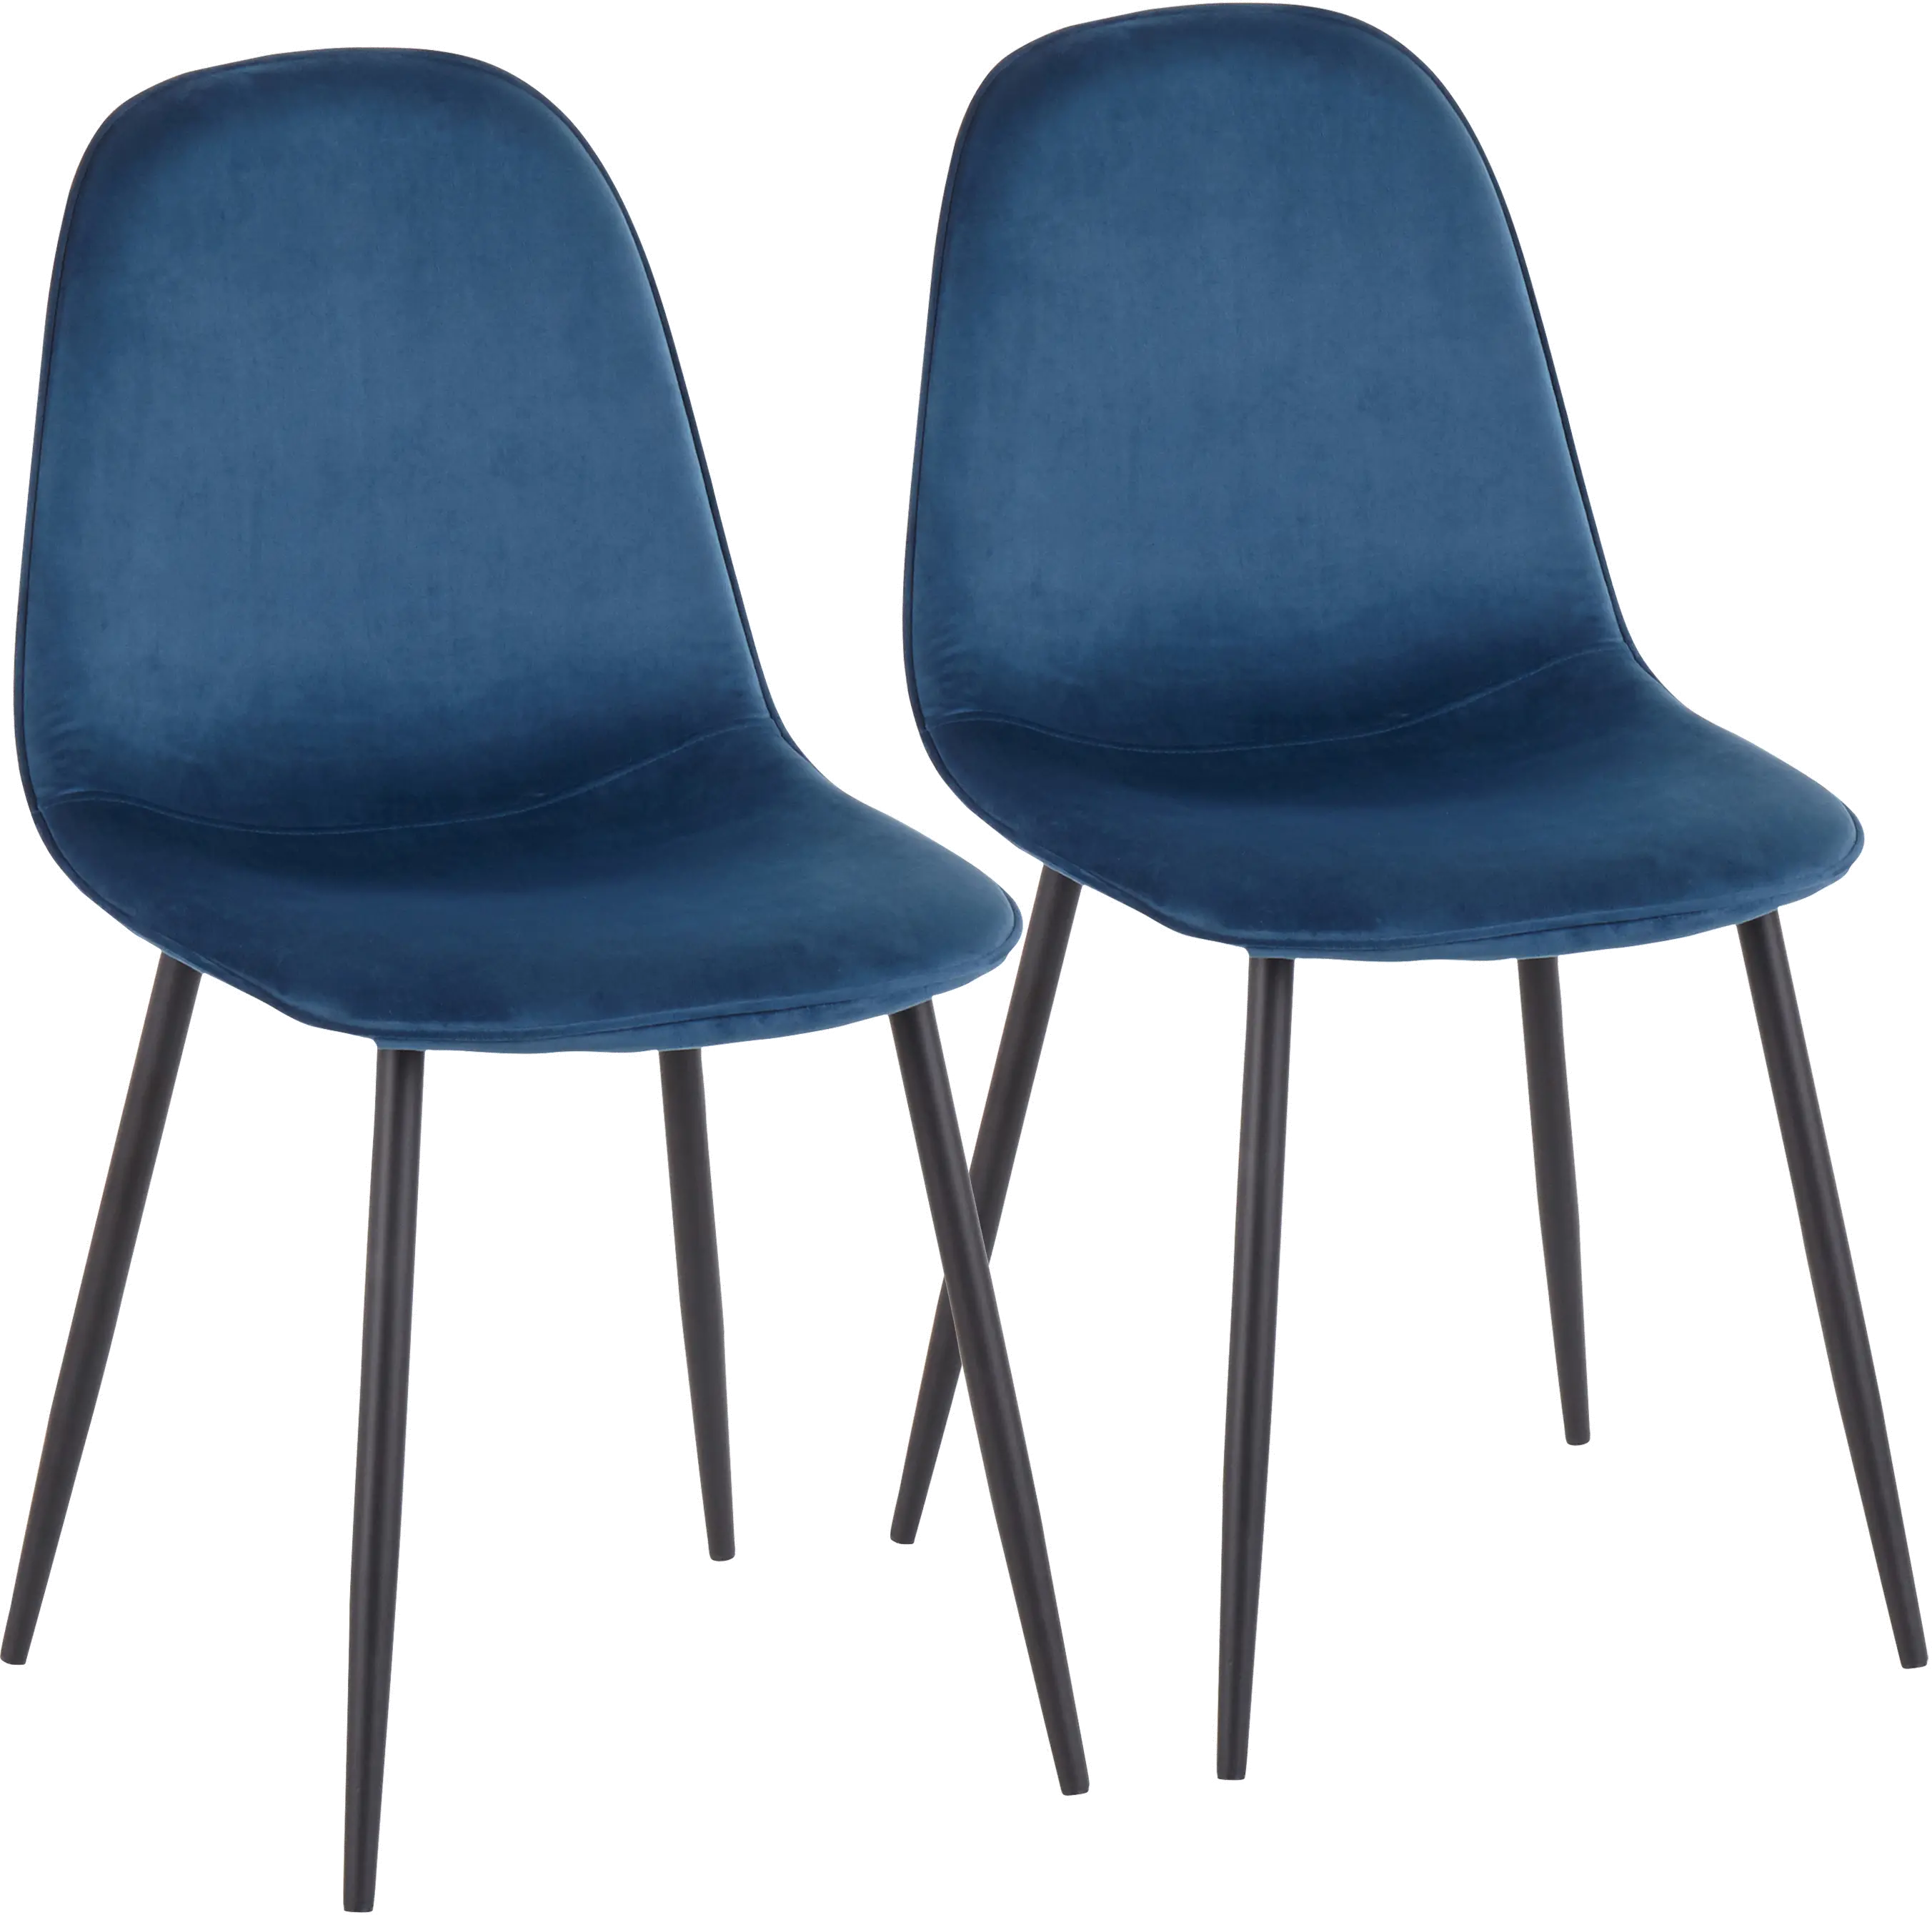 Contemporary Blue and Black Dining Room Chair (Set of 2) - Pebble